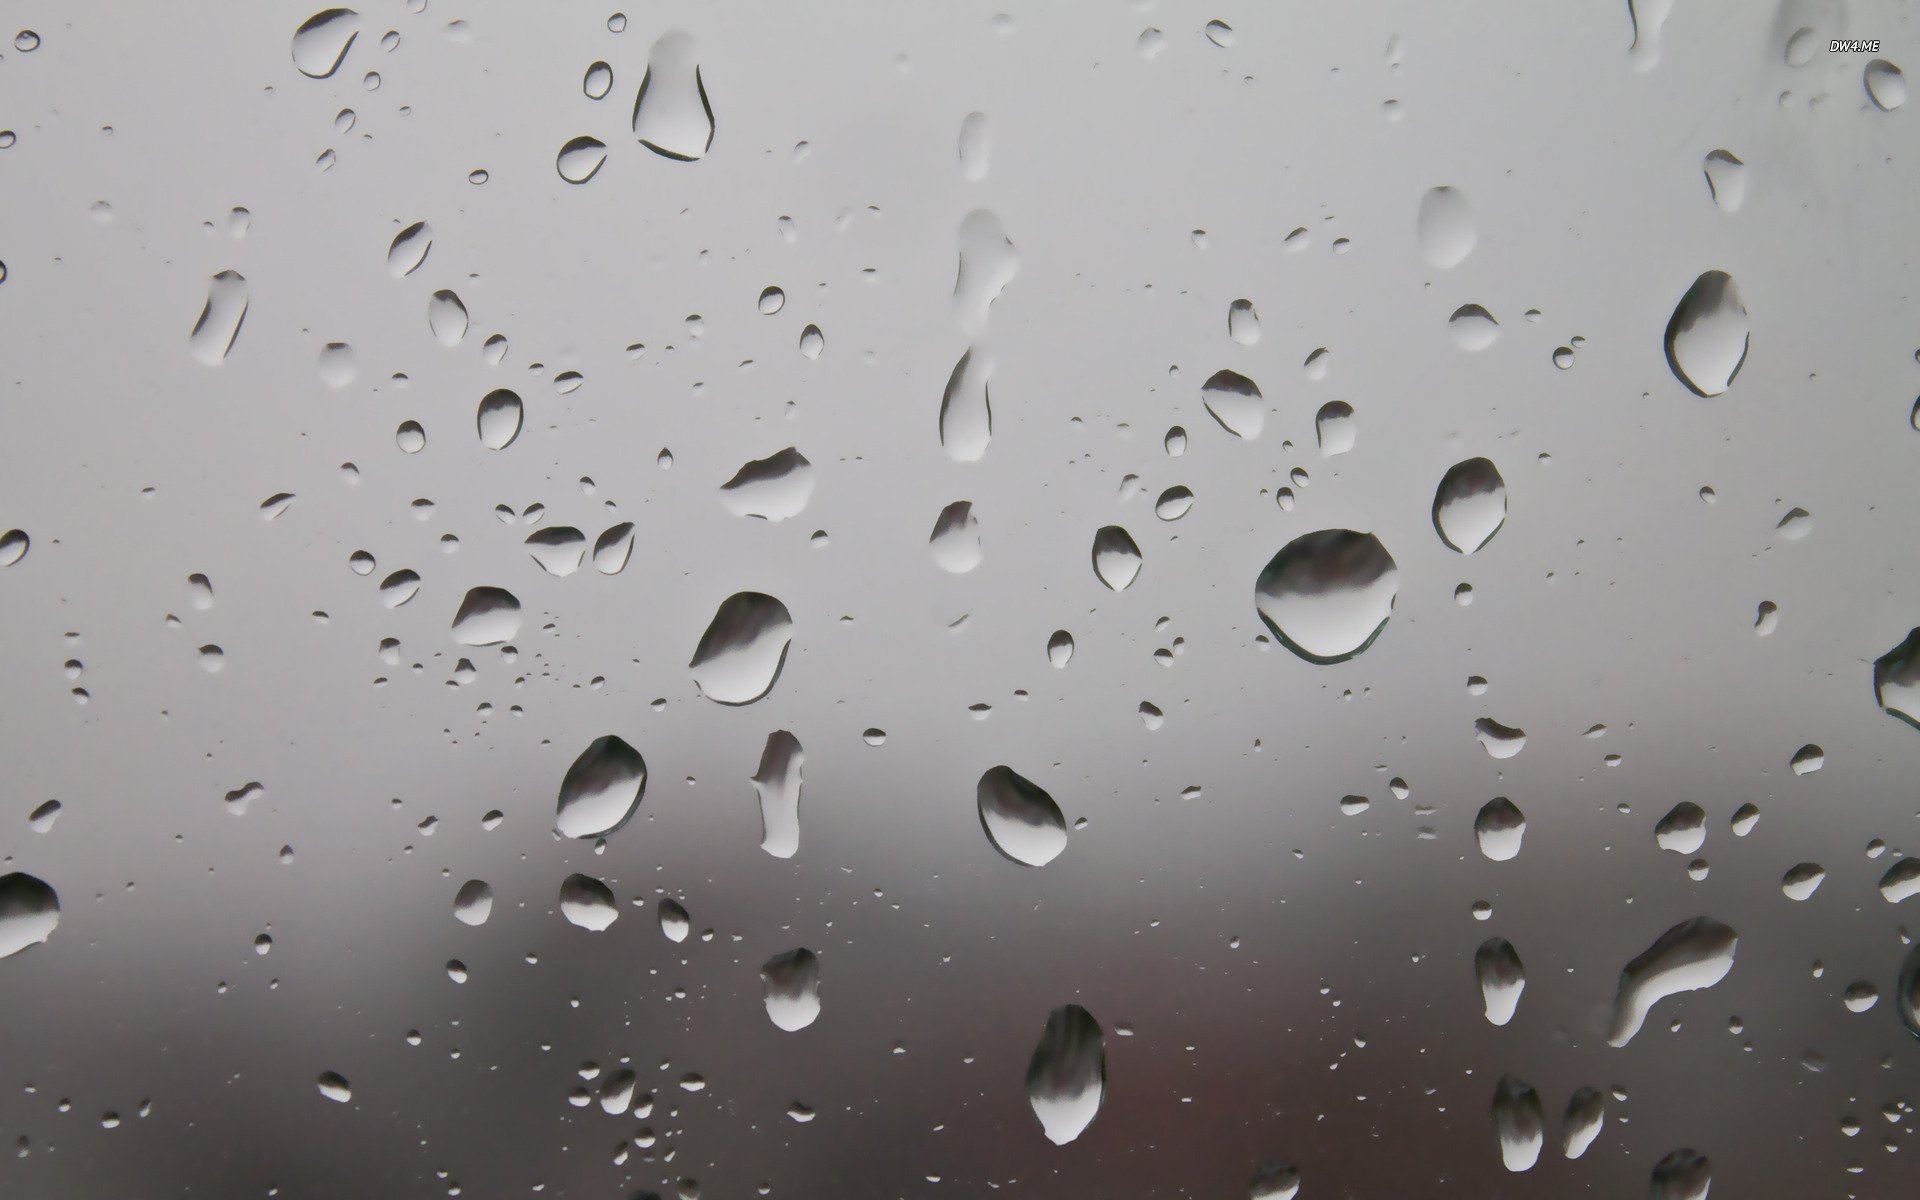 Raindrops on the window wallpaper   Photography wallpapers   588